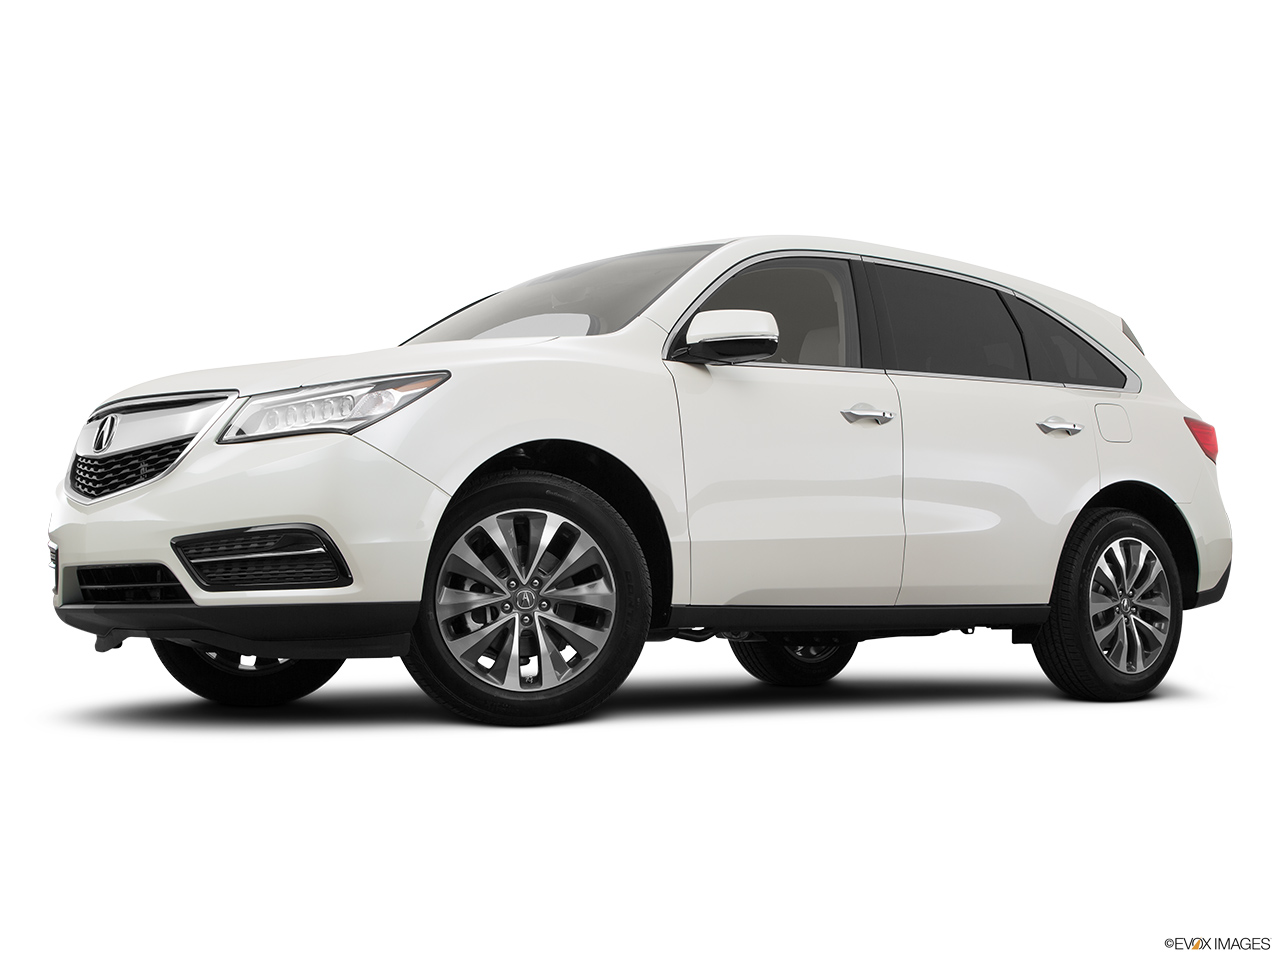 2016 Acura MDX SH-AWD Low/wide front 5/8. 